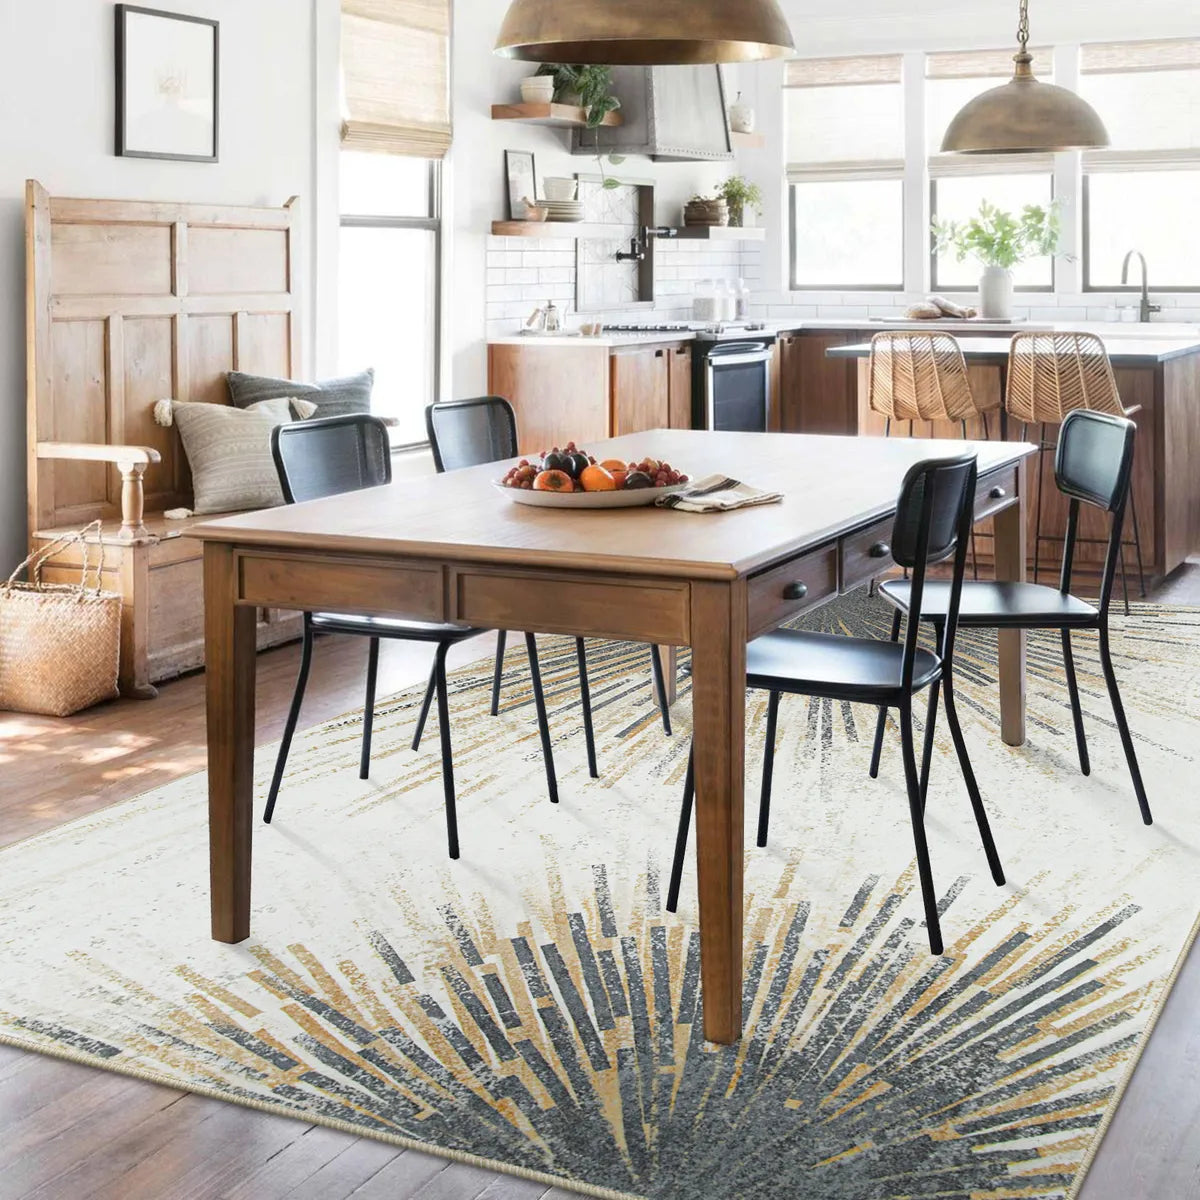 Lahome Modern Abstract Firework Gold Area Rug